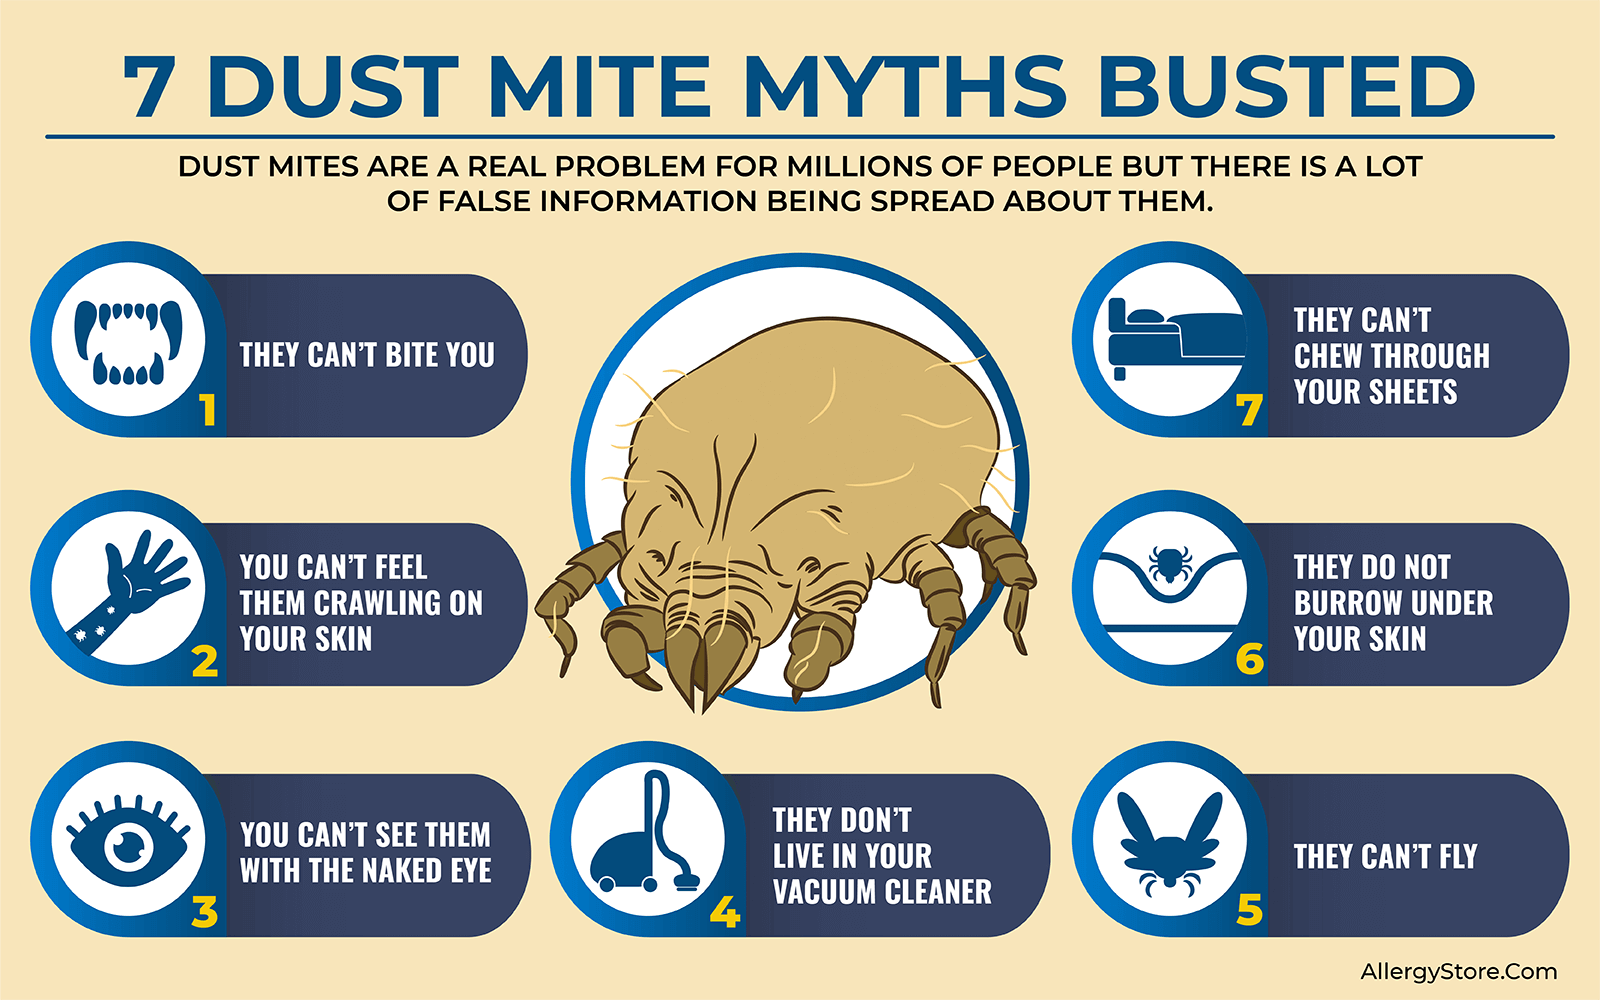 7 Dust Mite Myths Busted  We Need to Set the Record Straight.